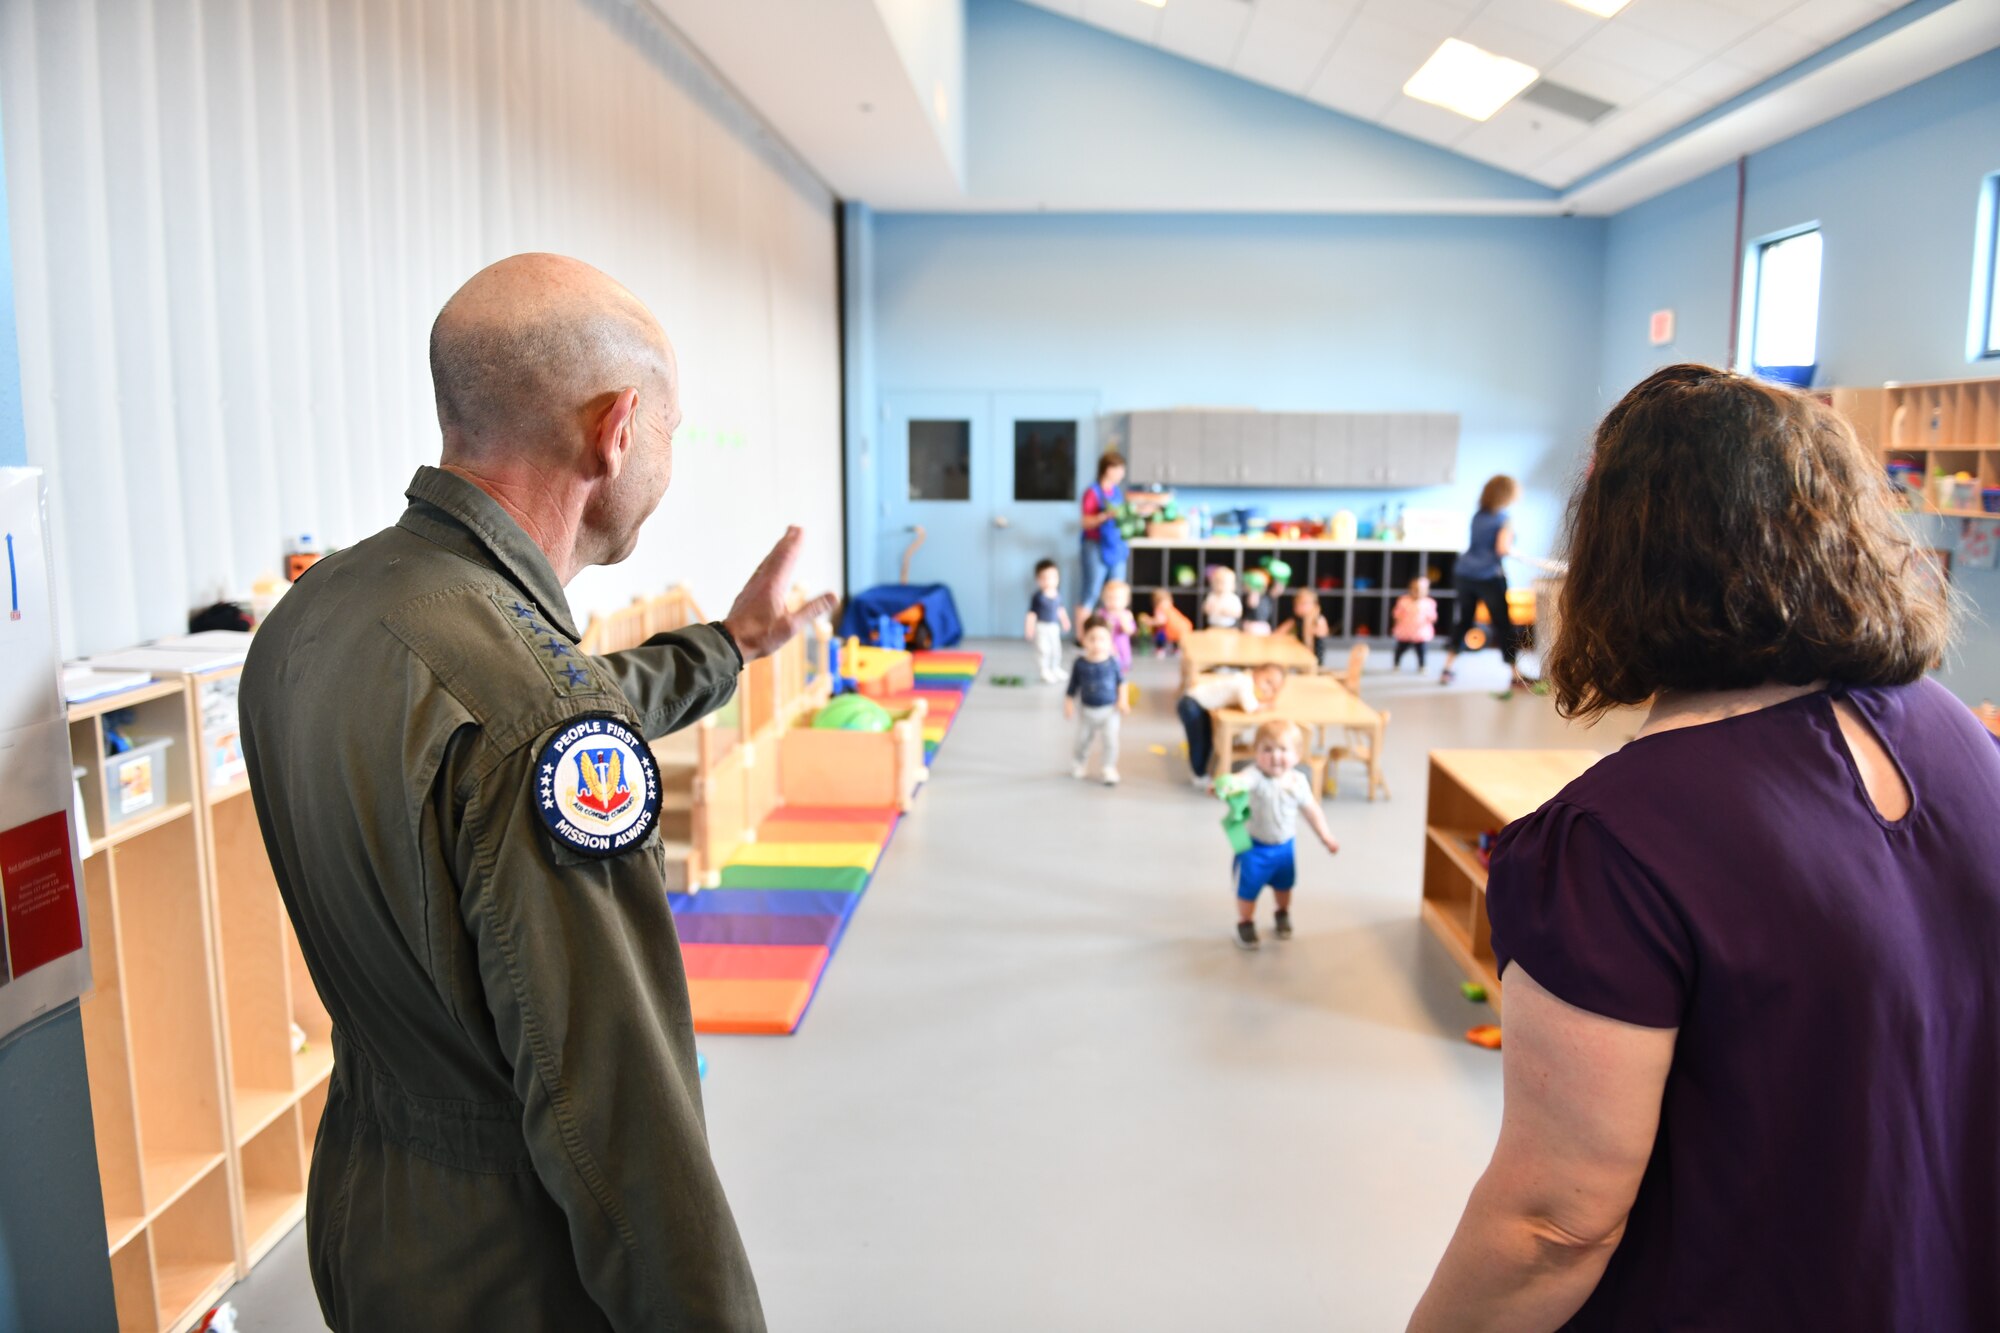 U.S. Air Force Gen. Mike Holmes, the commander of Air Combat Command, waves at children playing at the Child and Youth Program Center, Tyndall Air Force Base, Florida, Feb. 25, 2020. Holmes visited Tyndall to see how far it’s come with rebuilding after Hurricane Michael. (U.S. Air Force photo by Senior Airman Stefan Alvarez)